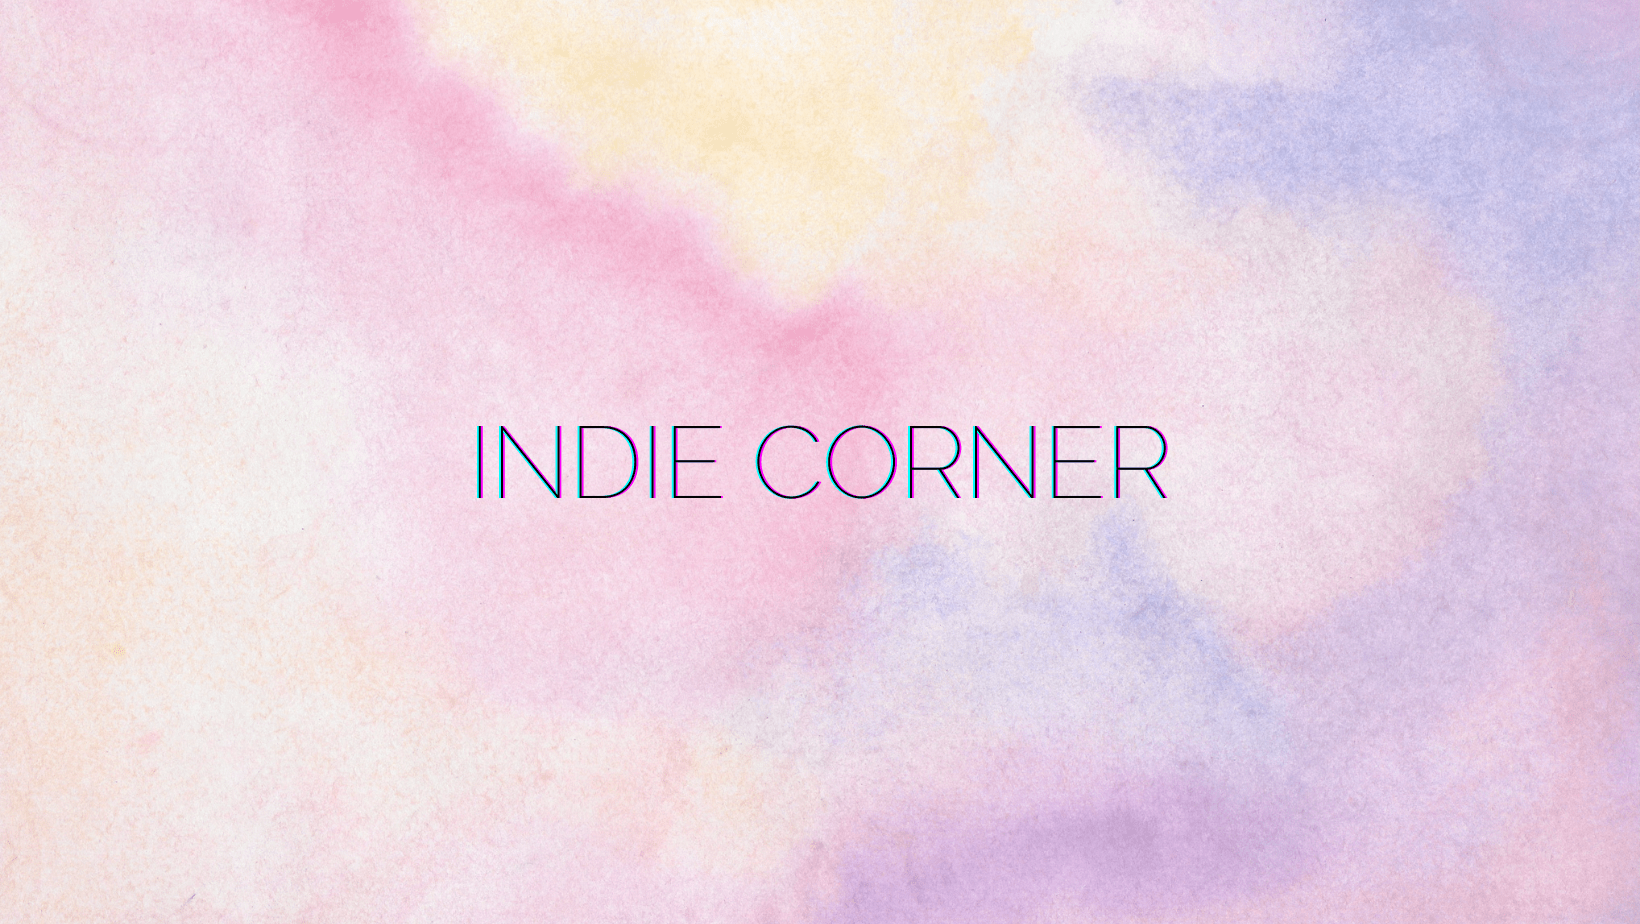 Indie Corner is not only a blog about India...